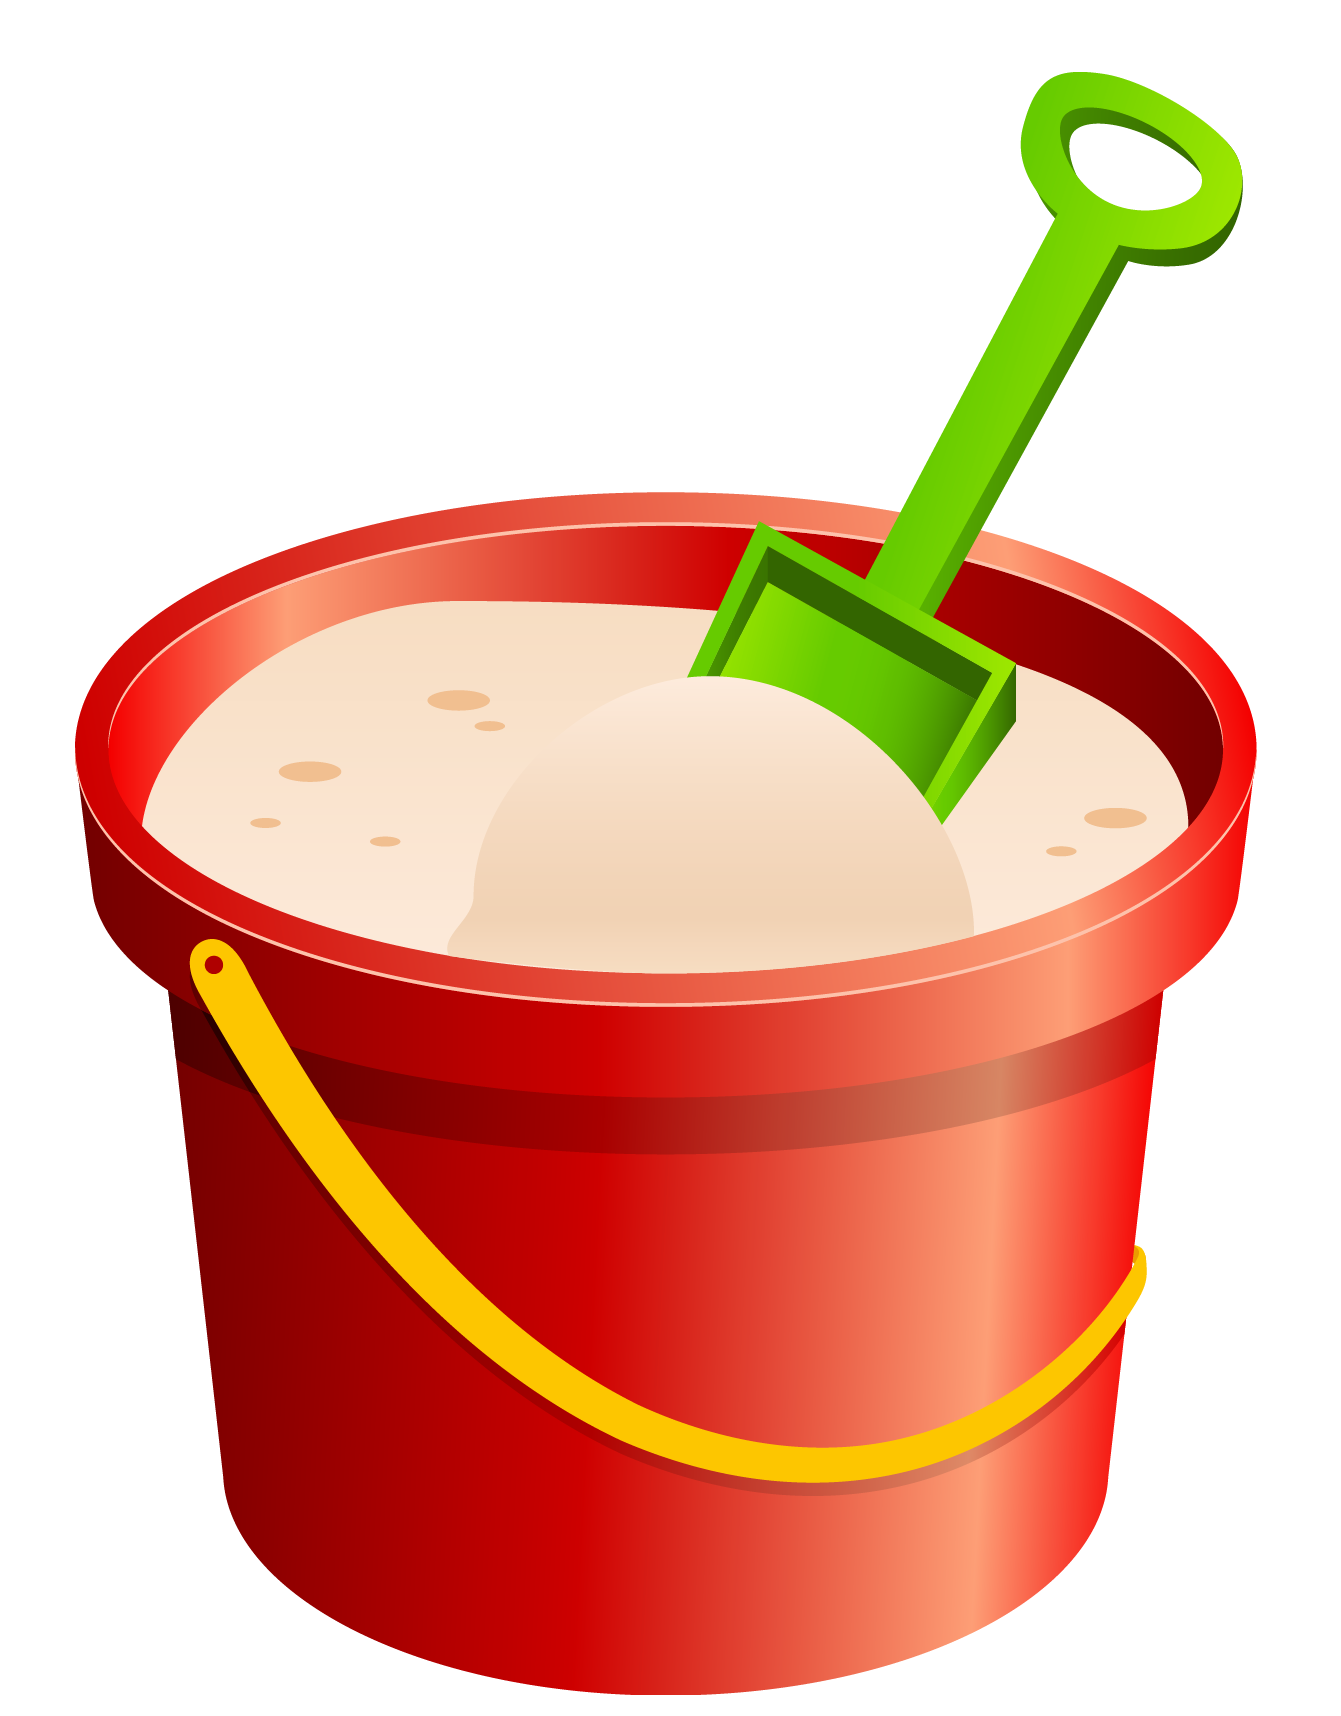 Red sand bucket and green shovel clipart